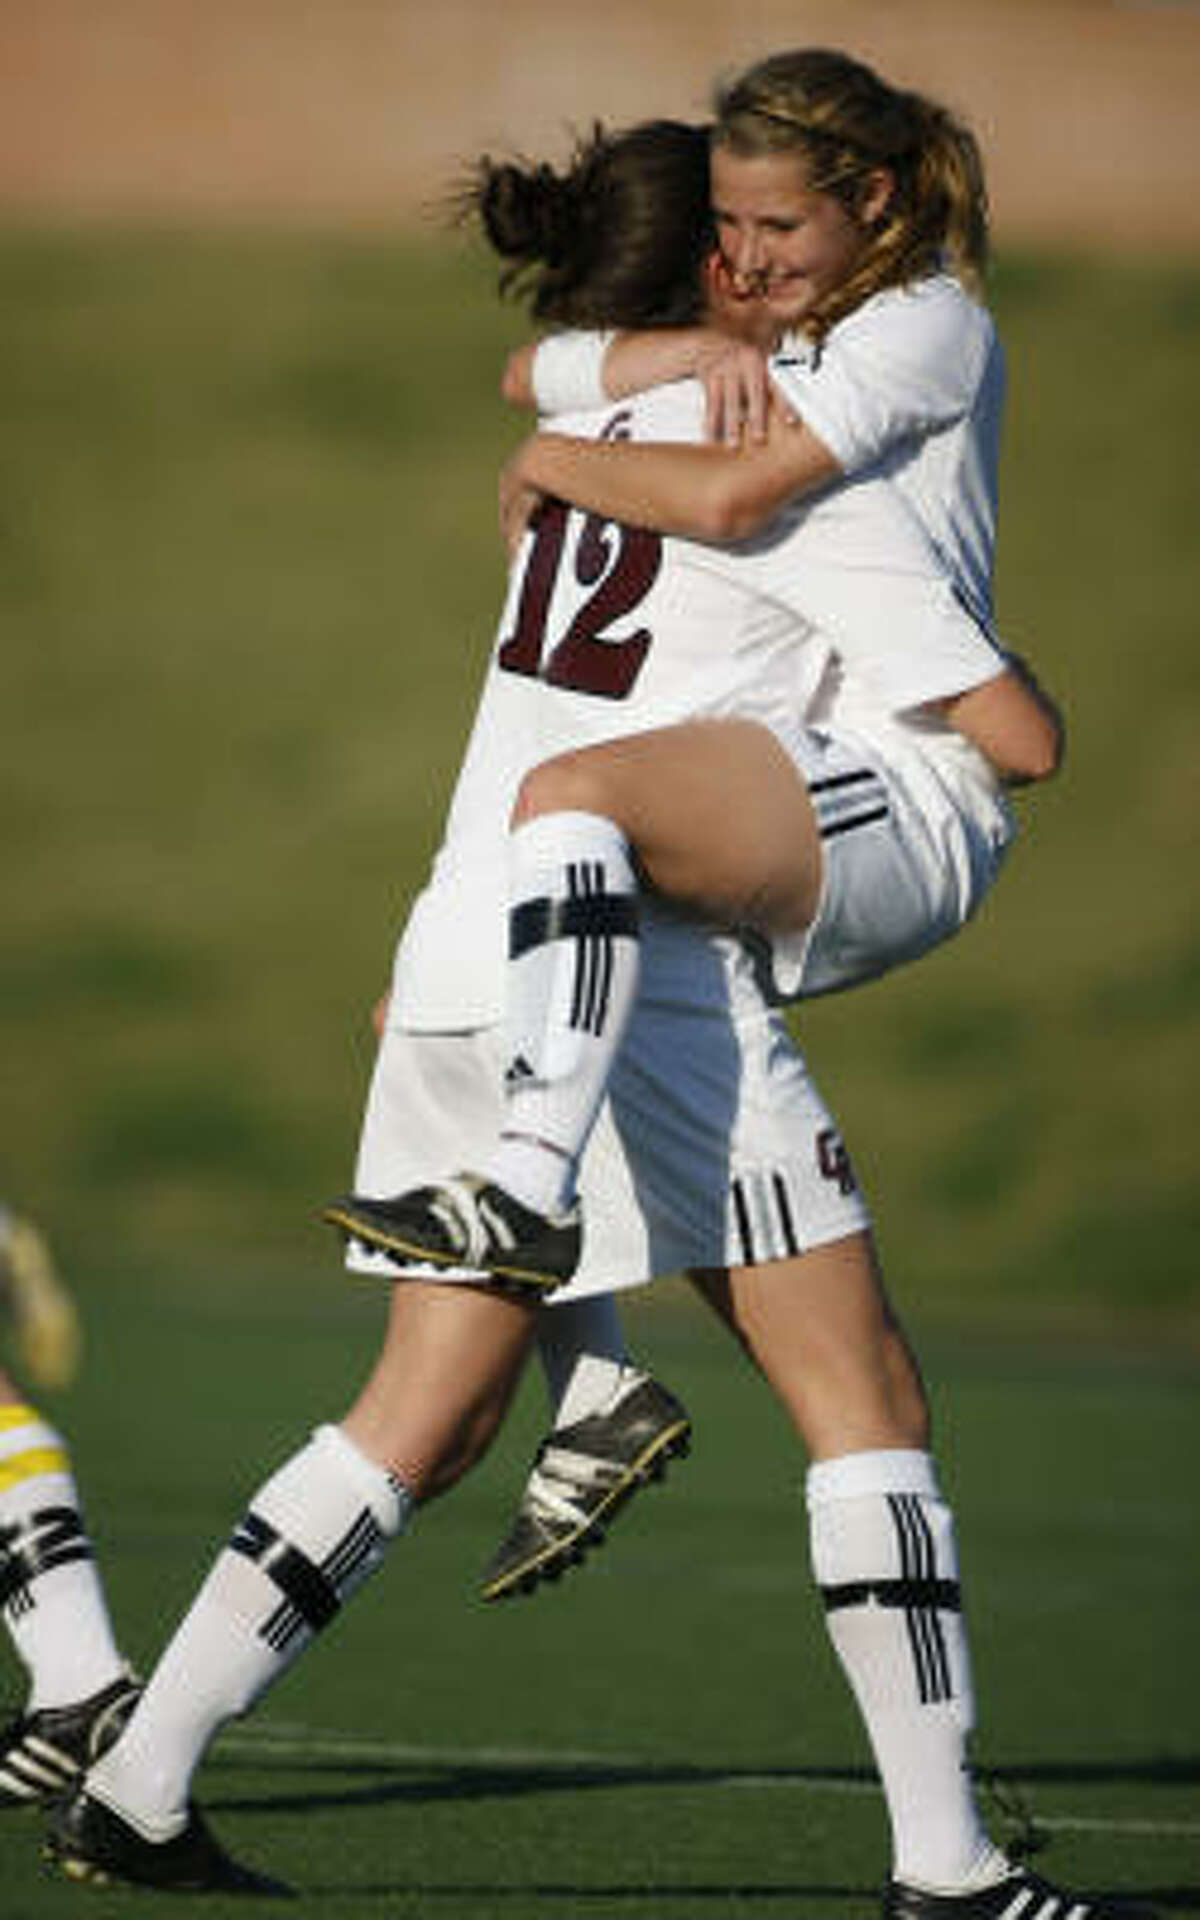 Cinco Ranch player Kayla Anderson, left, gets a celebratory hug from teammate Missy Wentz after Anderson's free kick from about 30 yards out gave the Cougars a 1-0 lead over Klein. The Cougars went on to win 2-0.